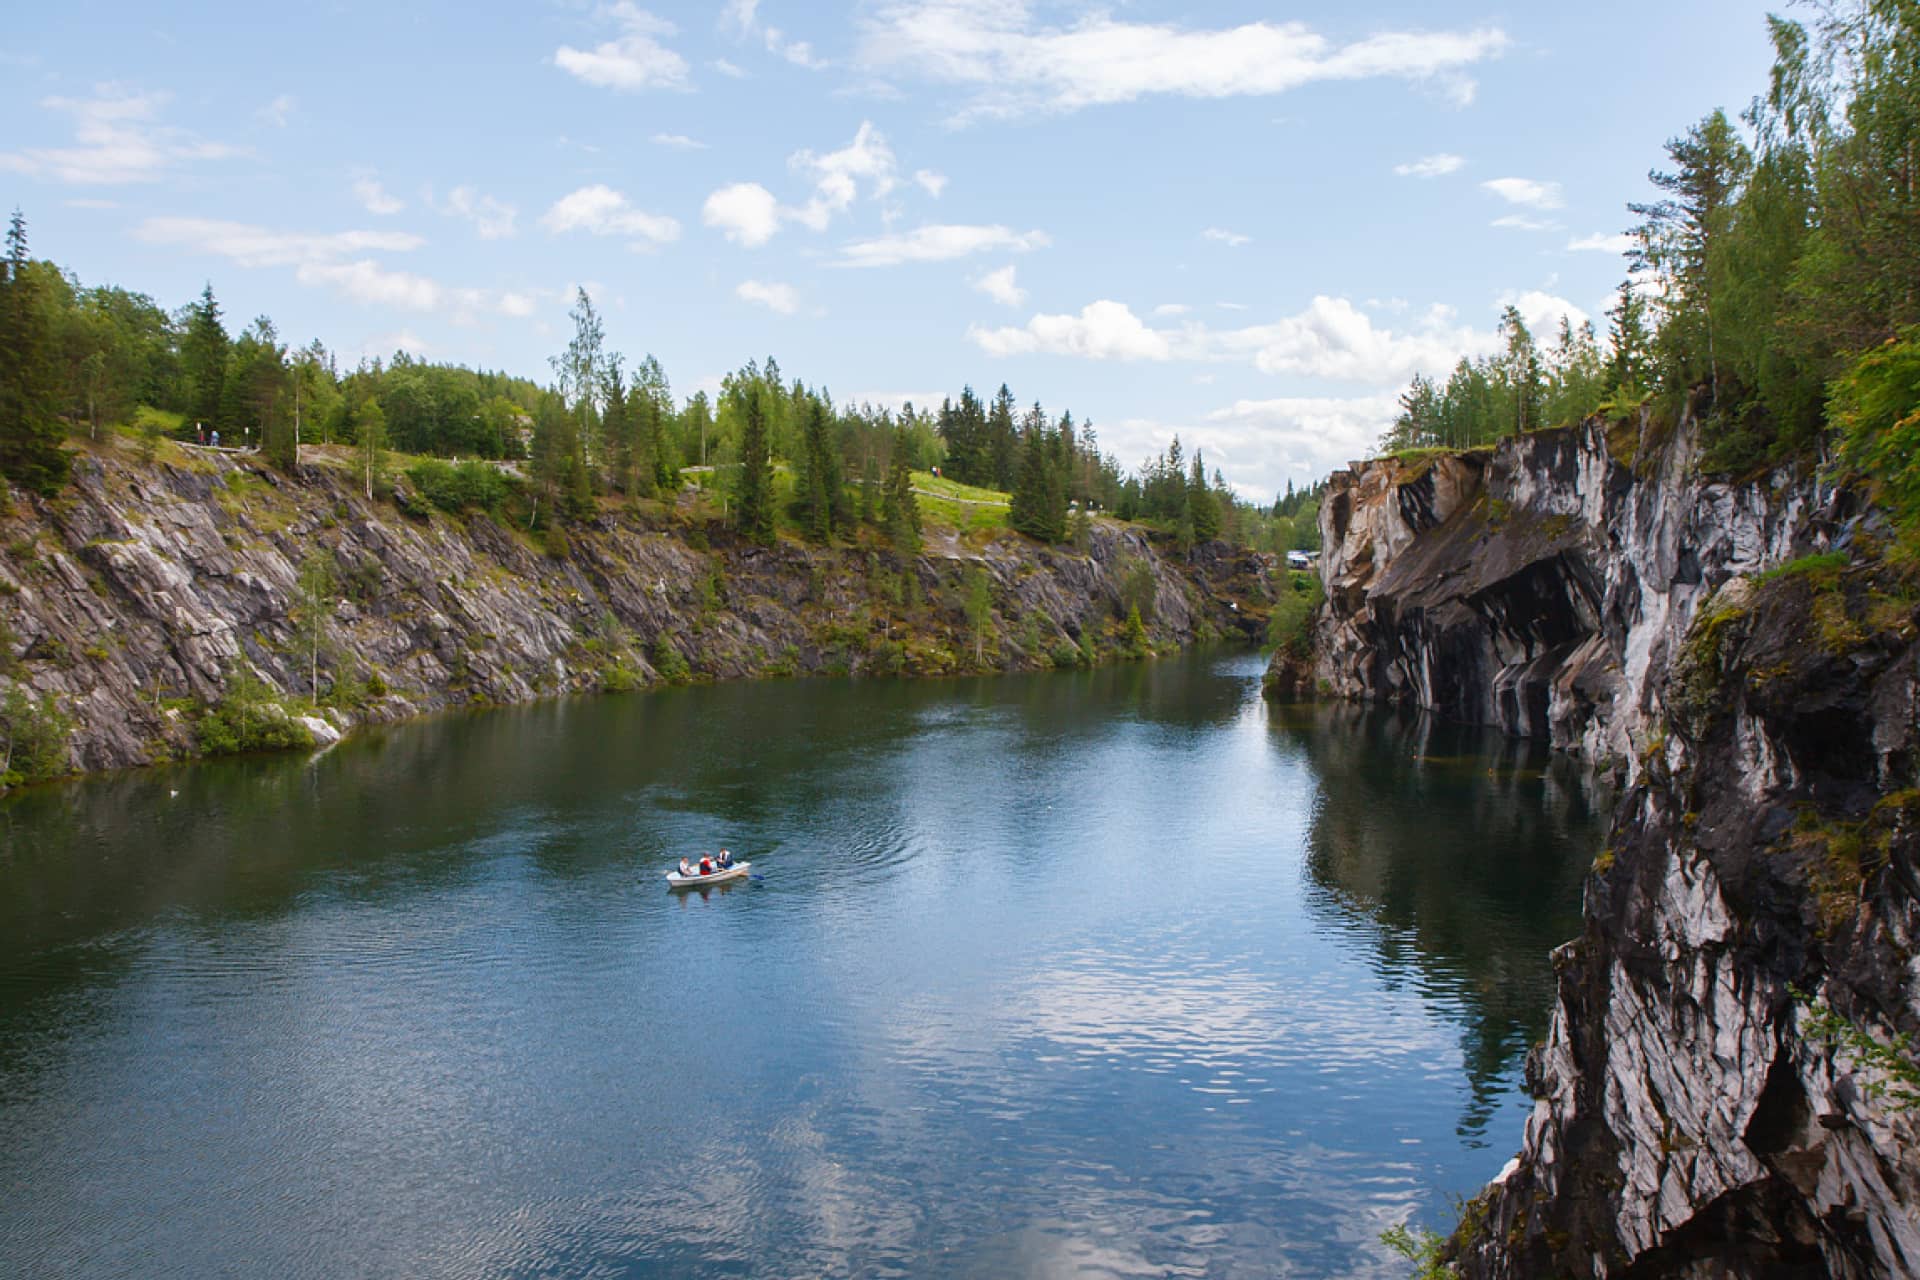 A marble quarry surrounded with marble cliffs with pine forest on the top, a boat on the water